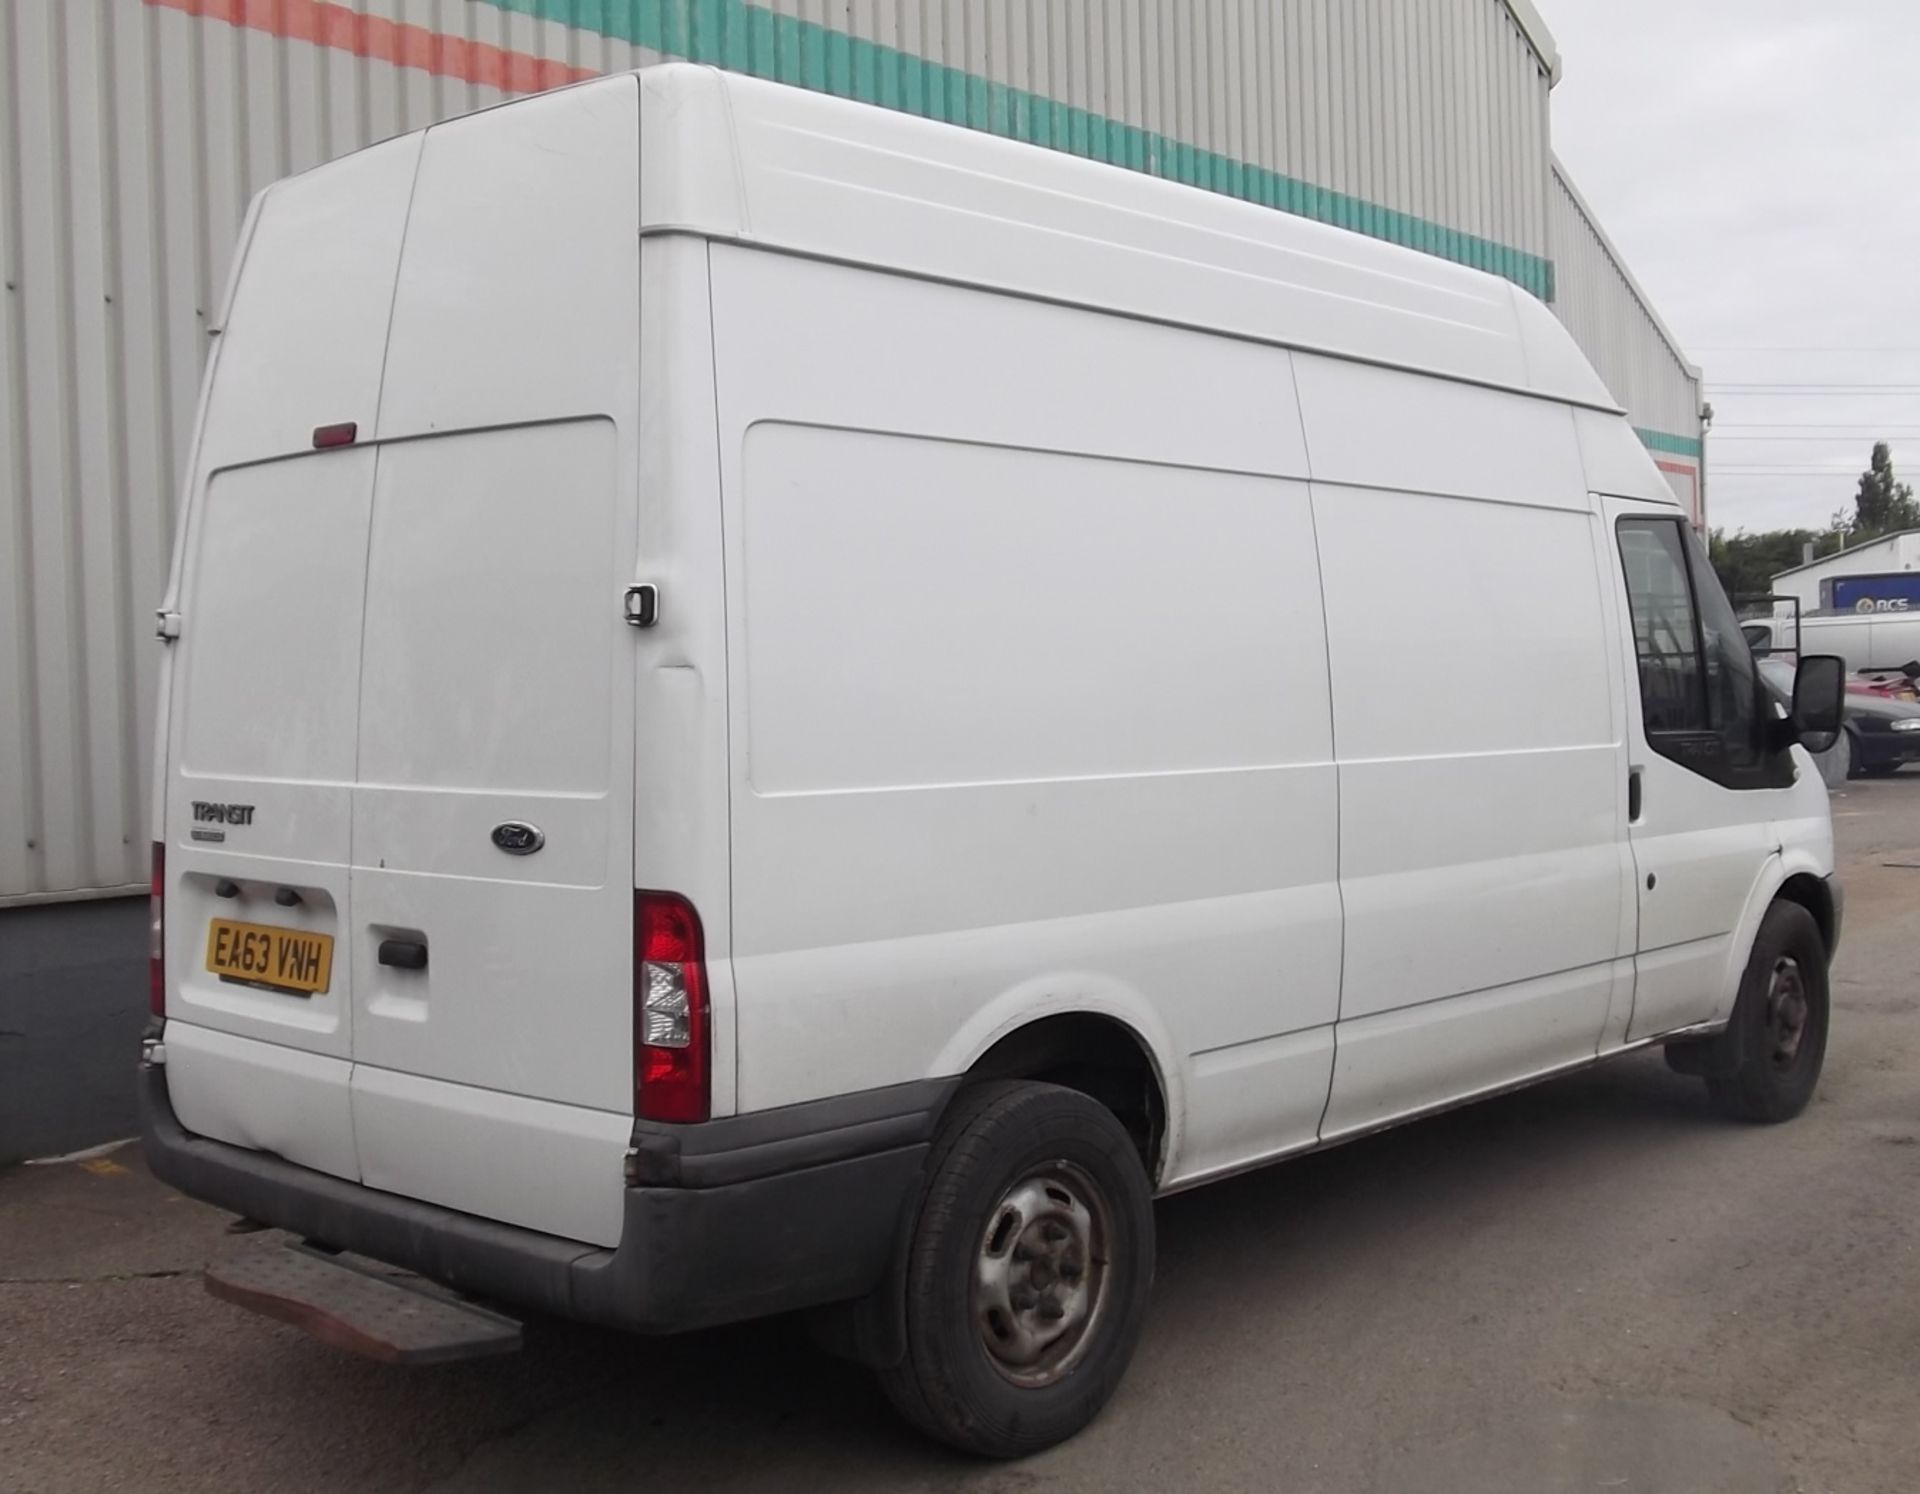 2013 Ford Transit 350 125 LWB MR Panel Van - CL505 - NO VAT ON THE HAMMER - Location: Corby, Northam - Image 5 of 8